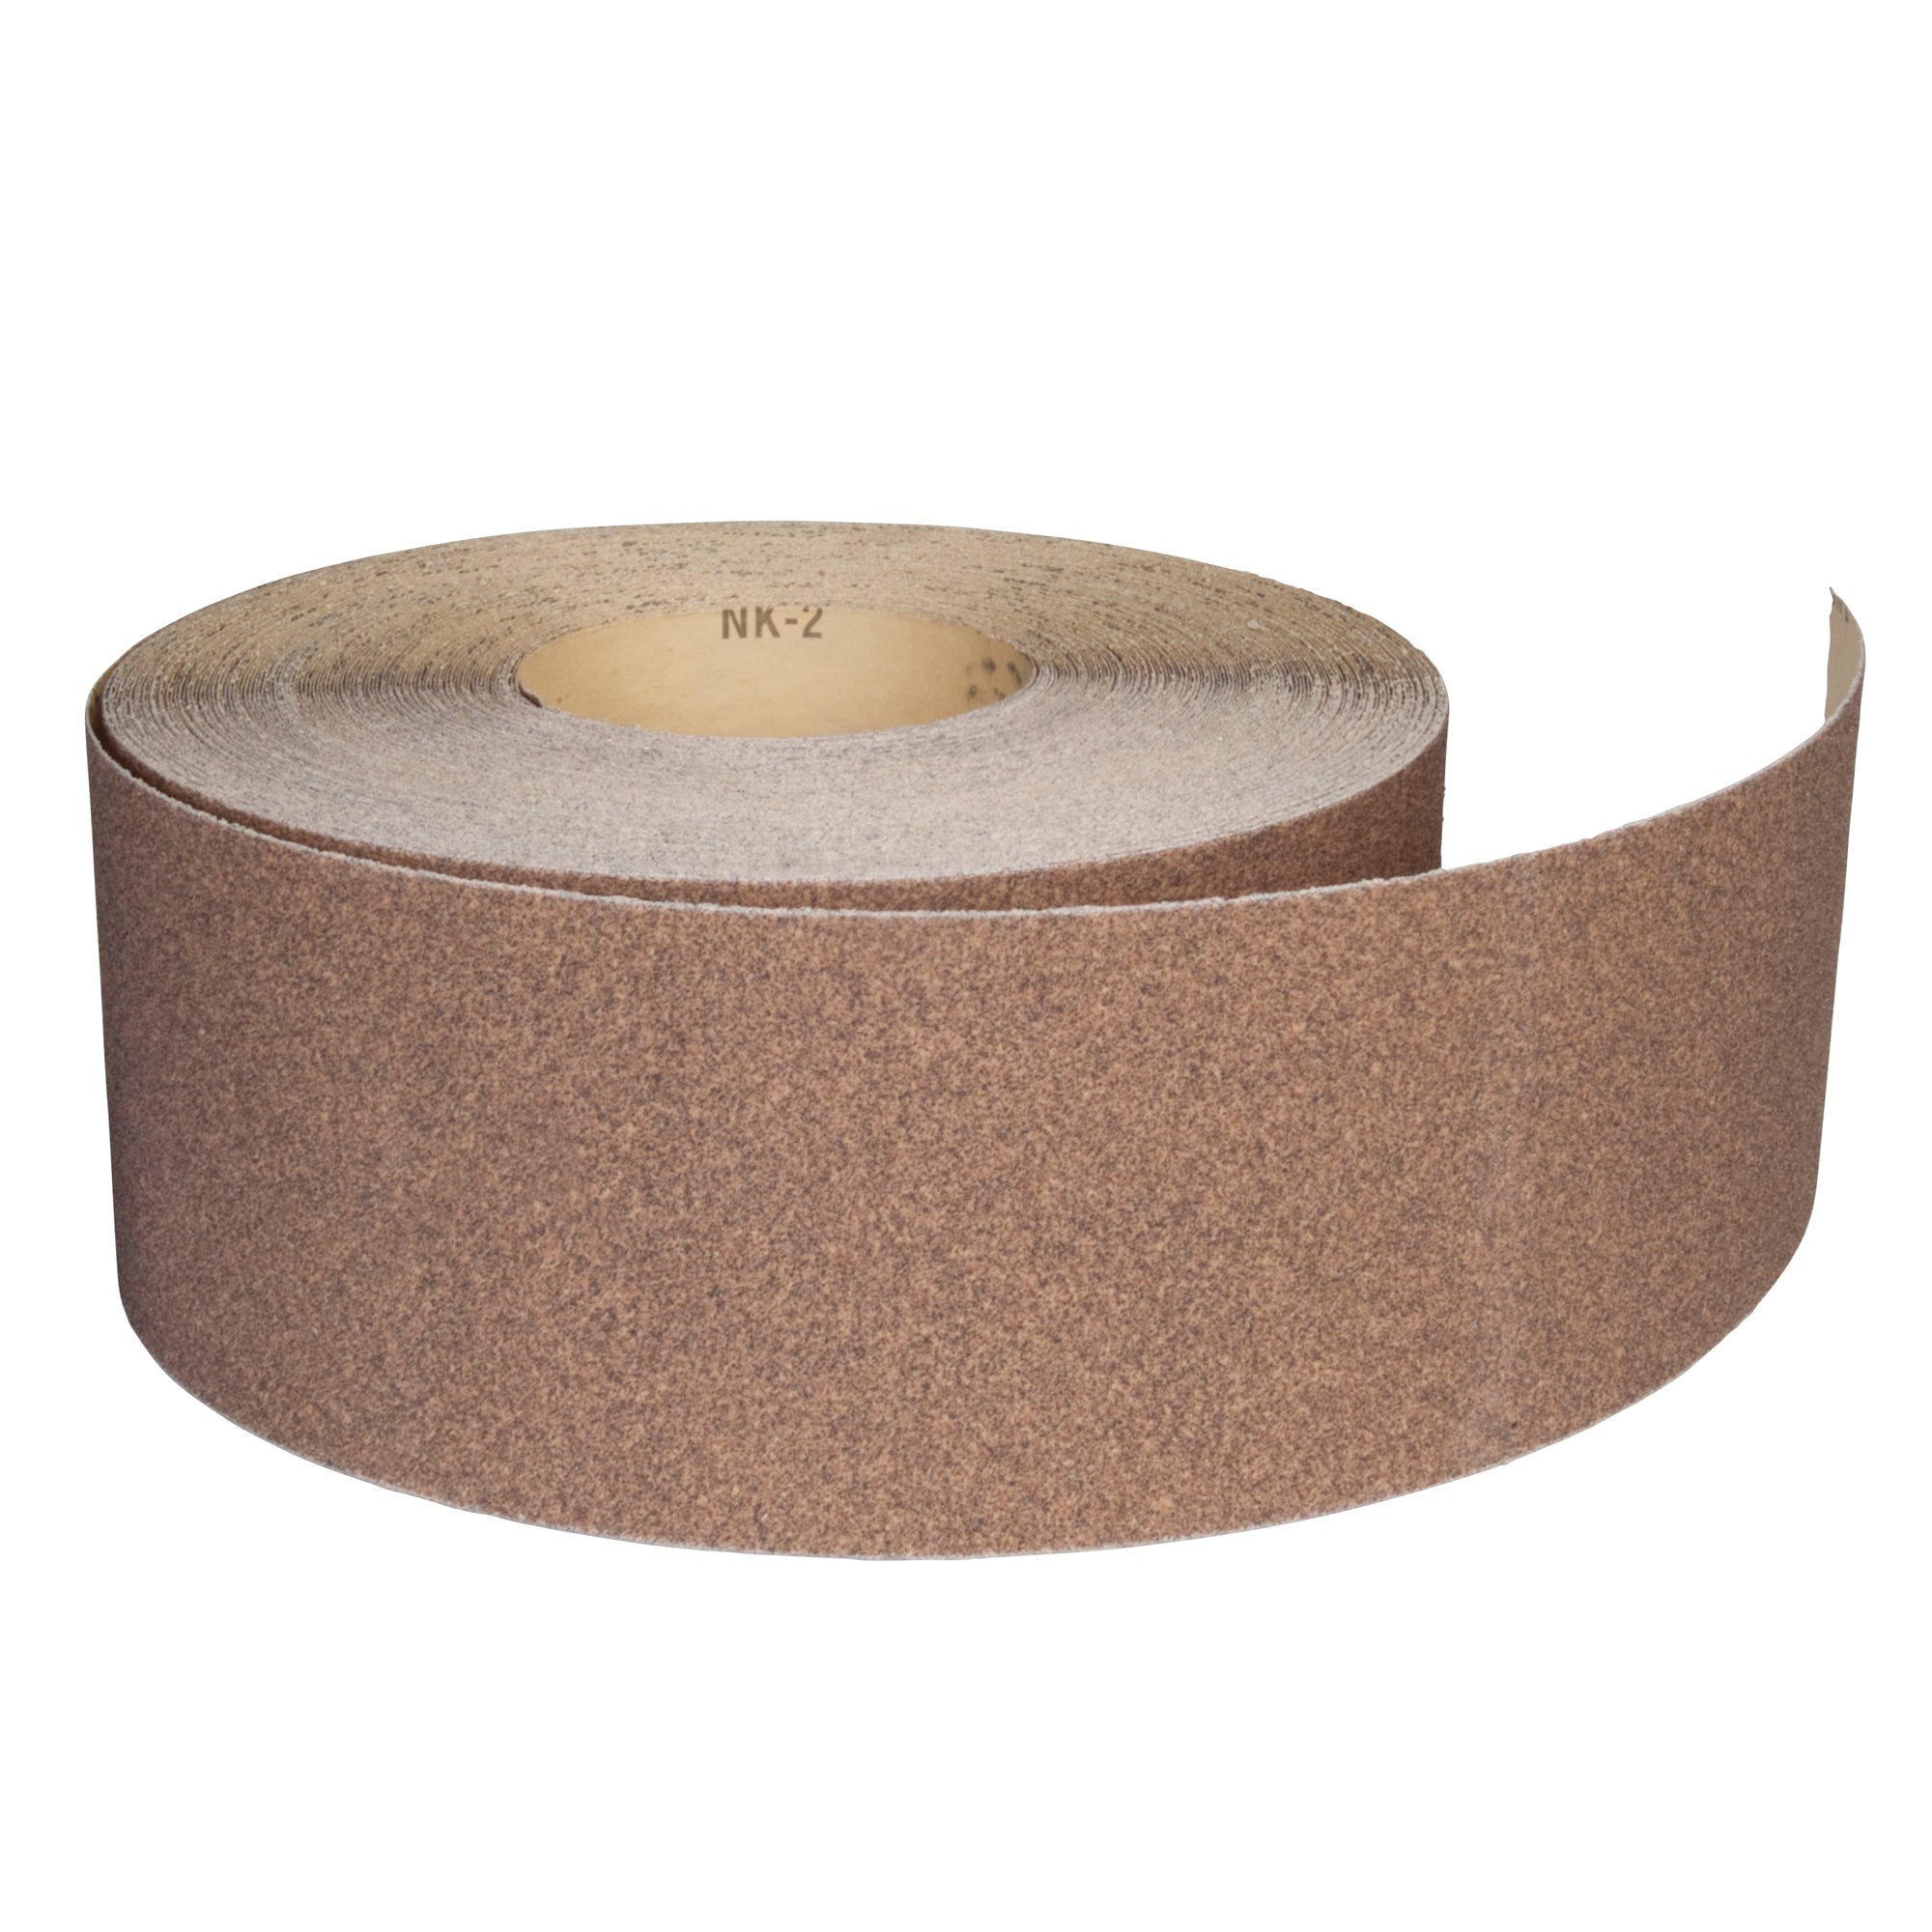 MultiSand A213 AO Coarse 60 Grit Paper Roll